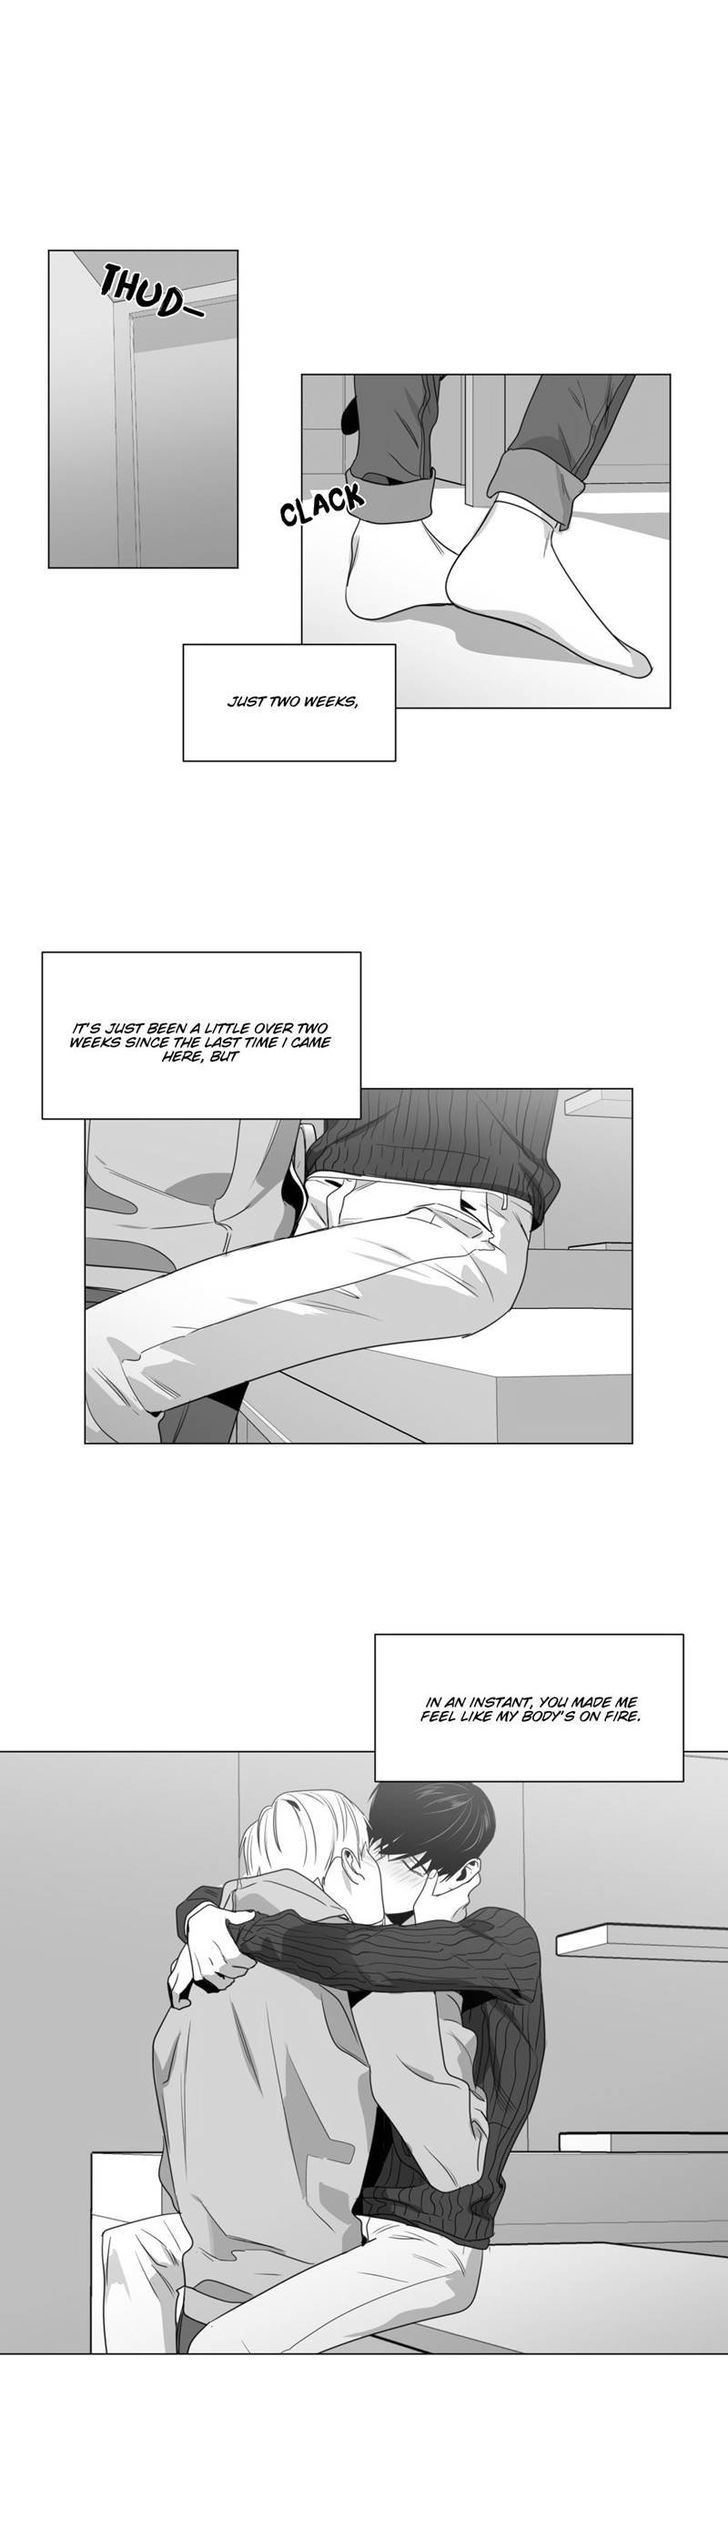 Lover Boy (Lezhin) Chapter 029 page 2